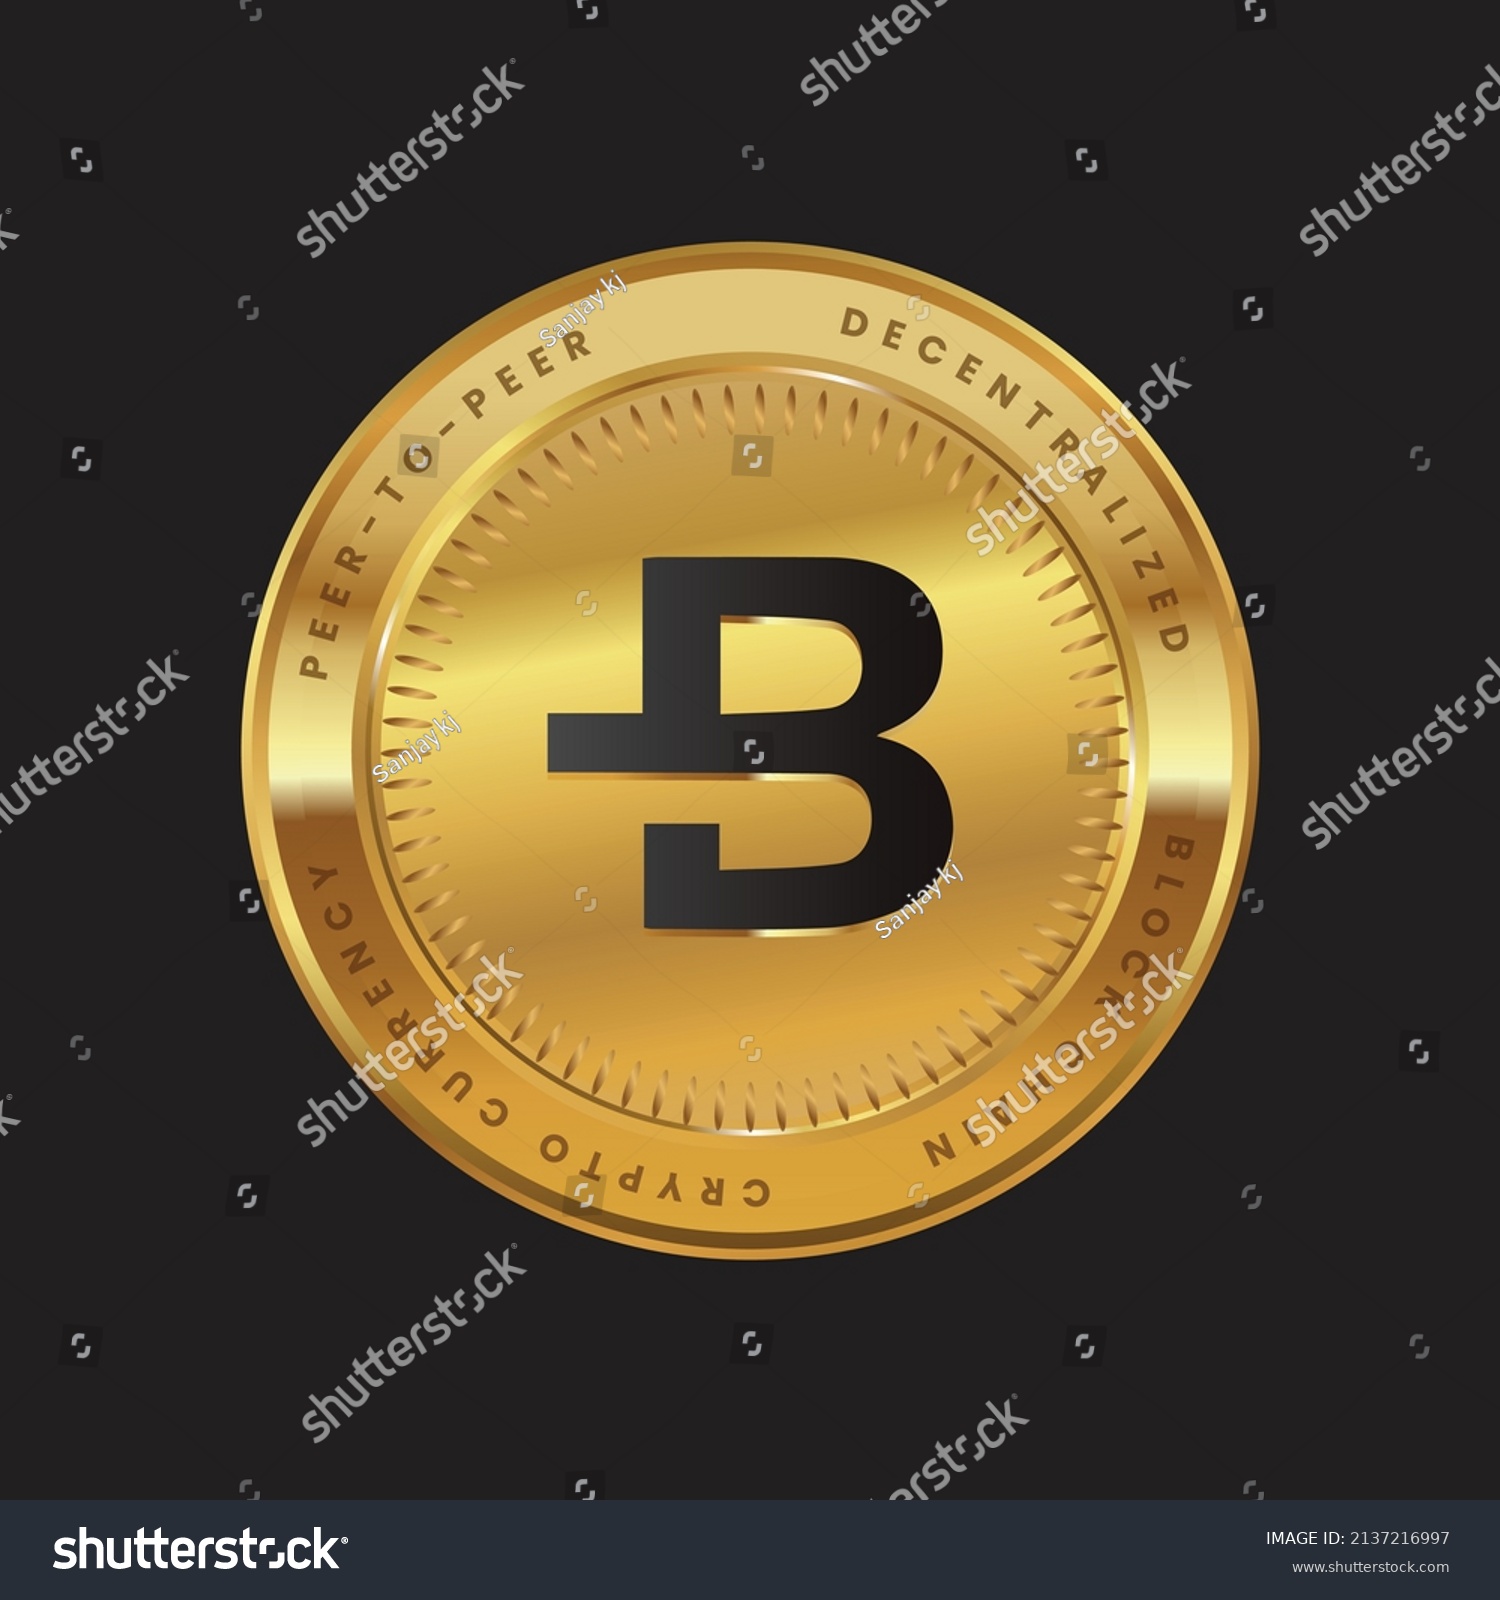 SVG of BCN Cryptocurrency logo in black color concept on gold coin. Bytecoin token Block chain technology symbol. Vector illustration. svg